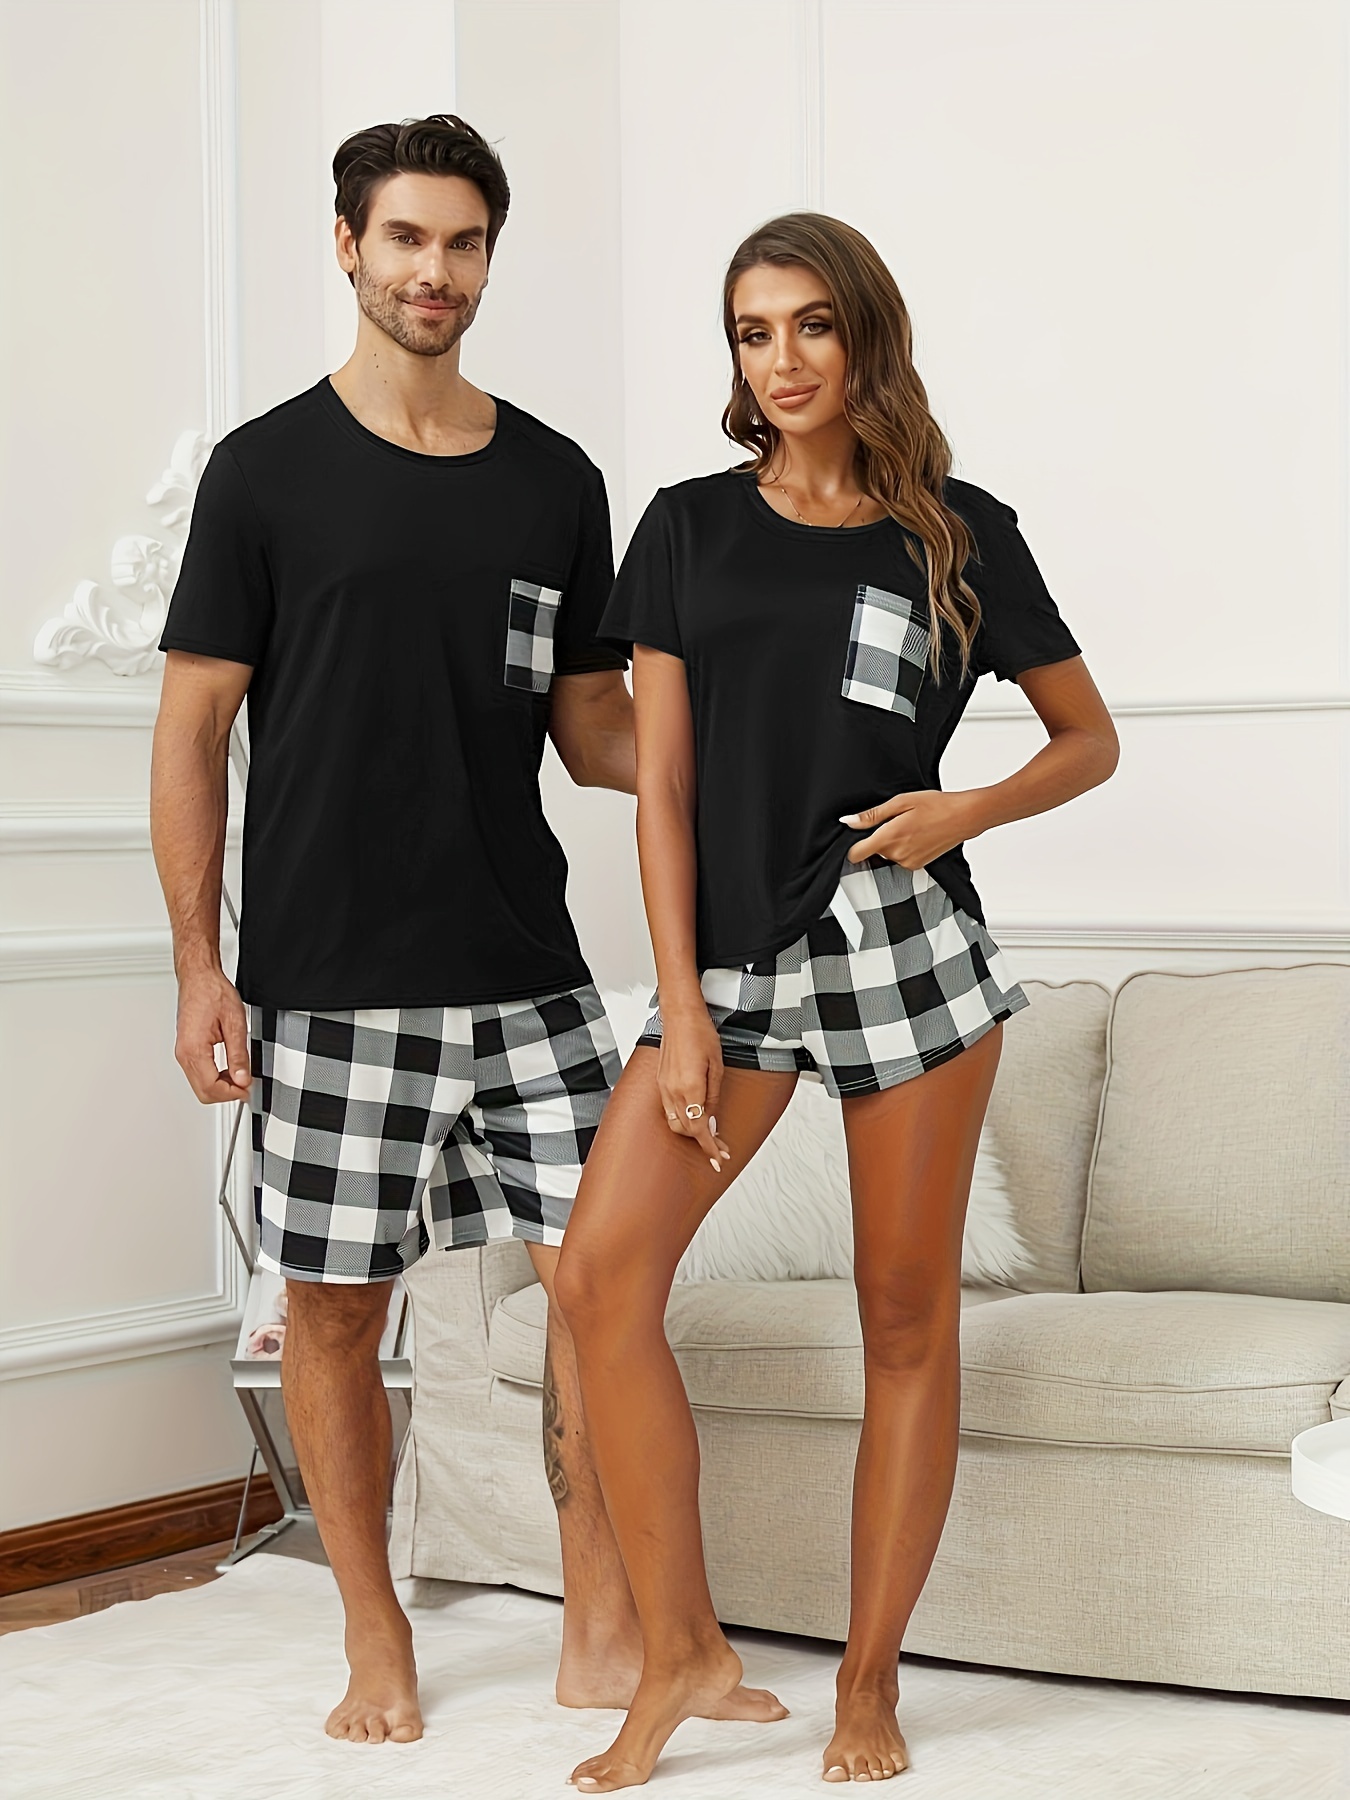 Couples Pajamas For Valentine's Day! Cozy up together in matching